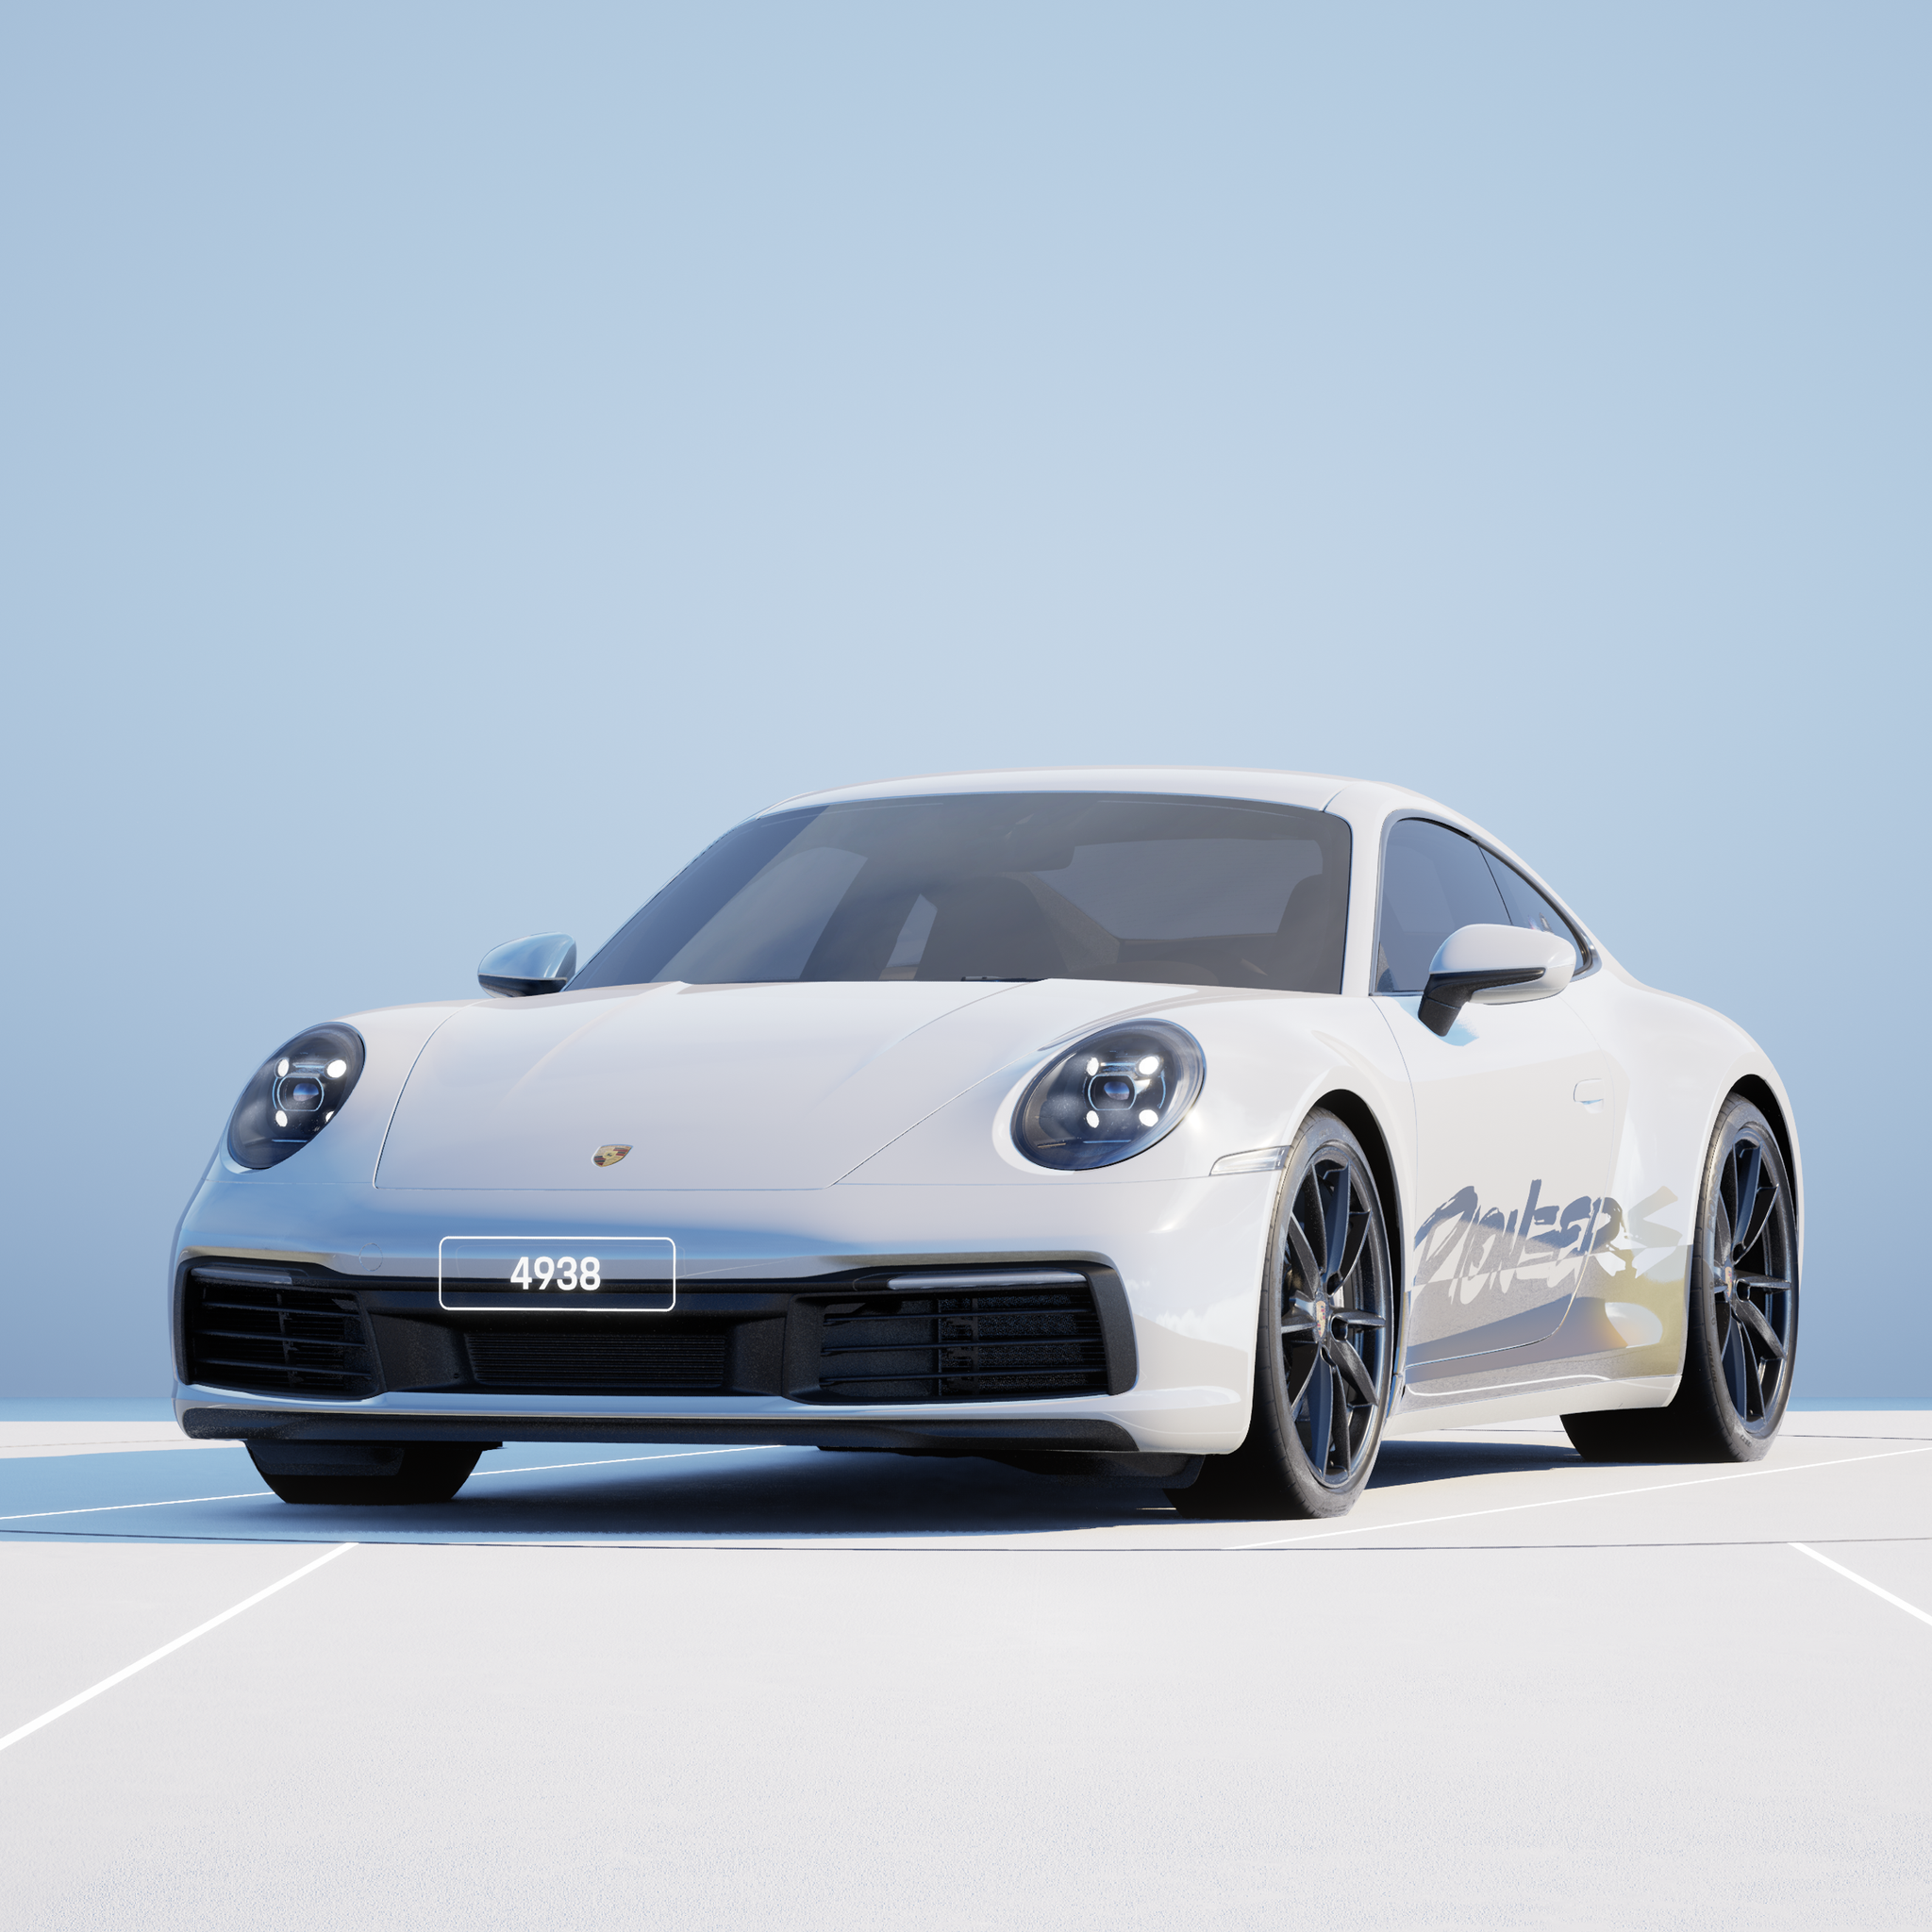 The PORSCHΞ 911 4938 image in phase